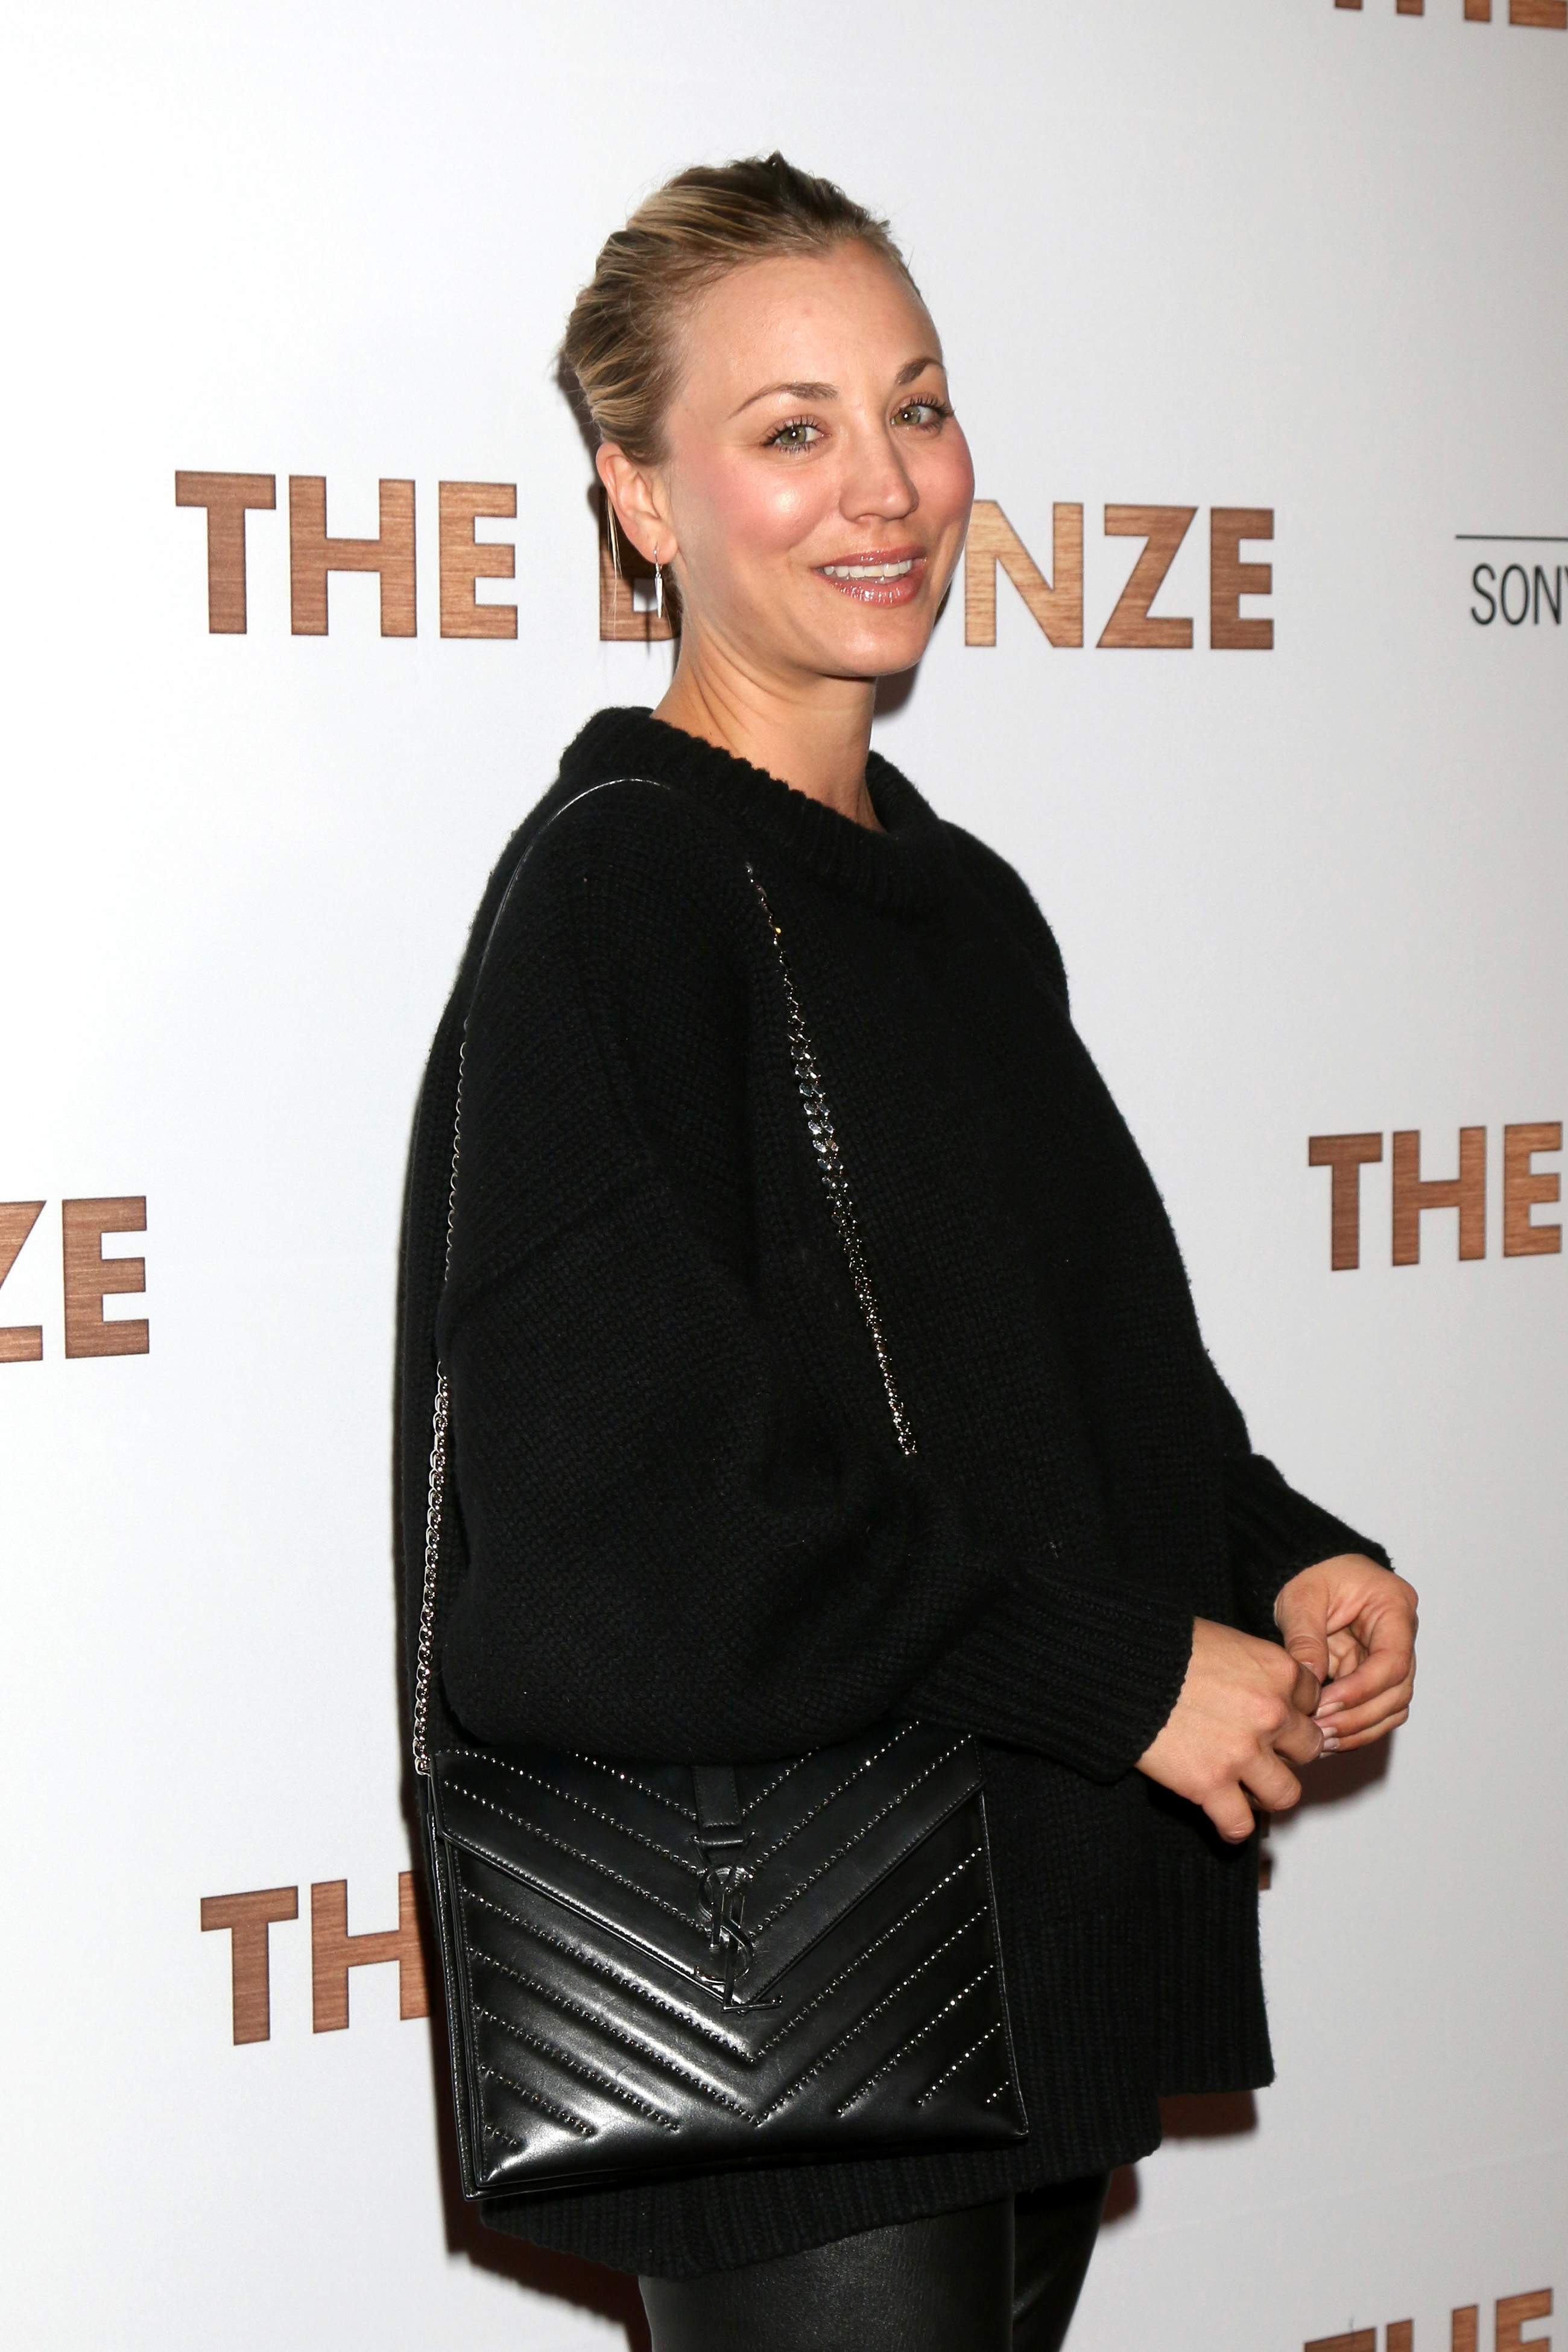 Kaley Cuoco attends the premiere of The Bronze